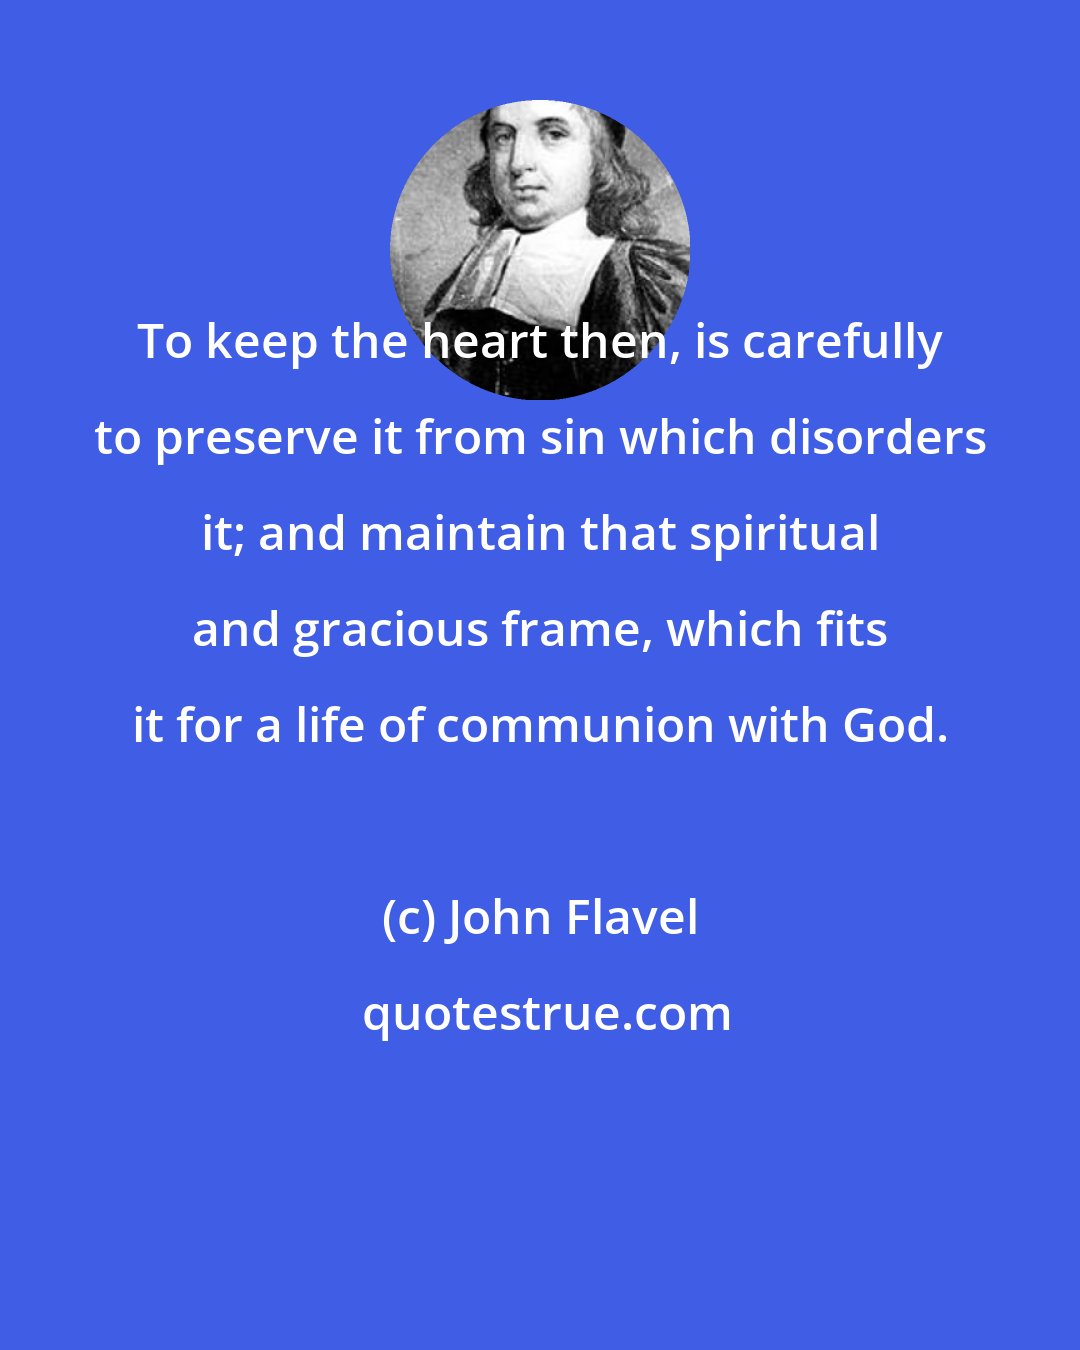 John Flavel: To keep the heart then, is carefully to preserve it from sin which disorders it; and maintain that spiritual and gracious frame, which fits it for a life of communion with God.